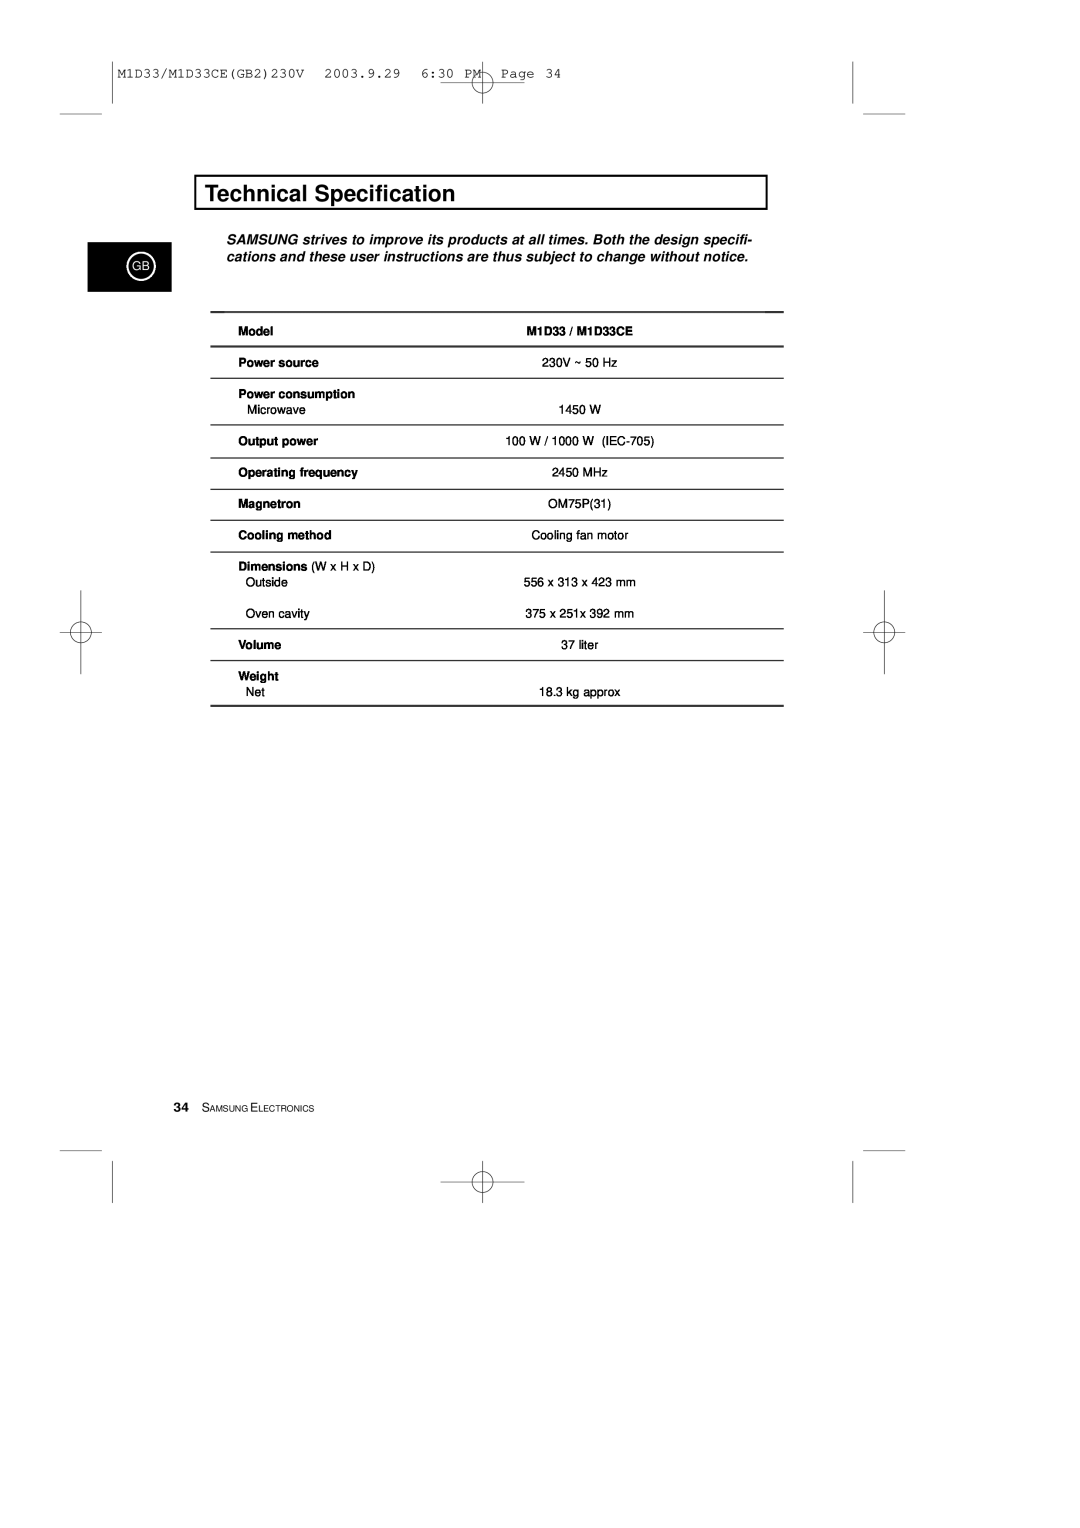 Samsung manual Technical Specification, M1D33/M1D33CEGB2230V 2003.9.29 630 PM Page 